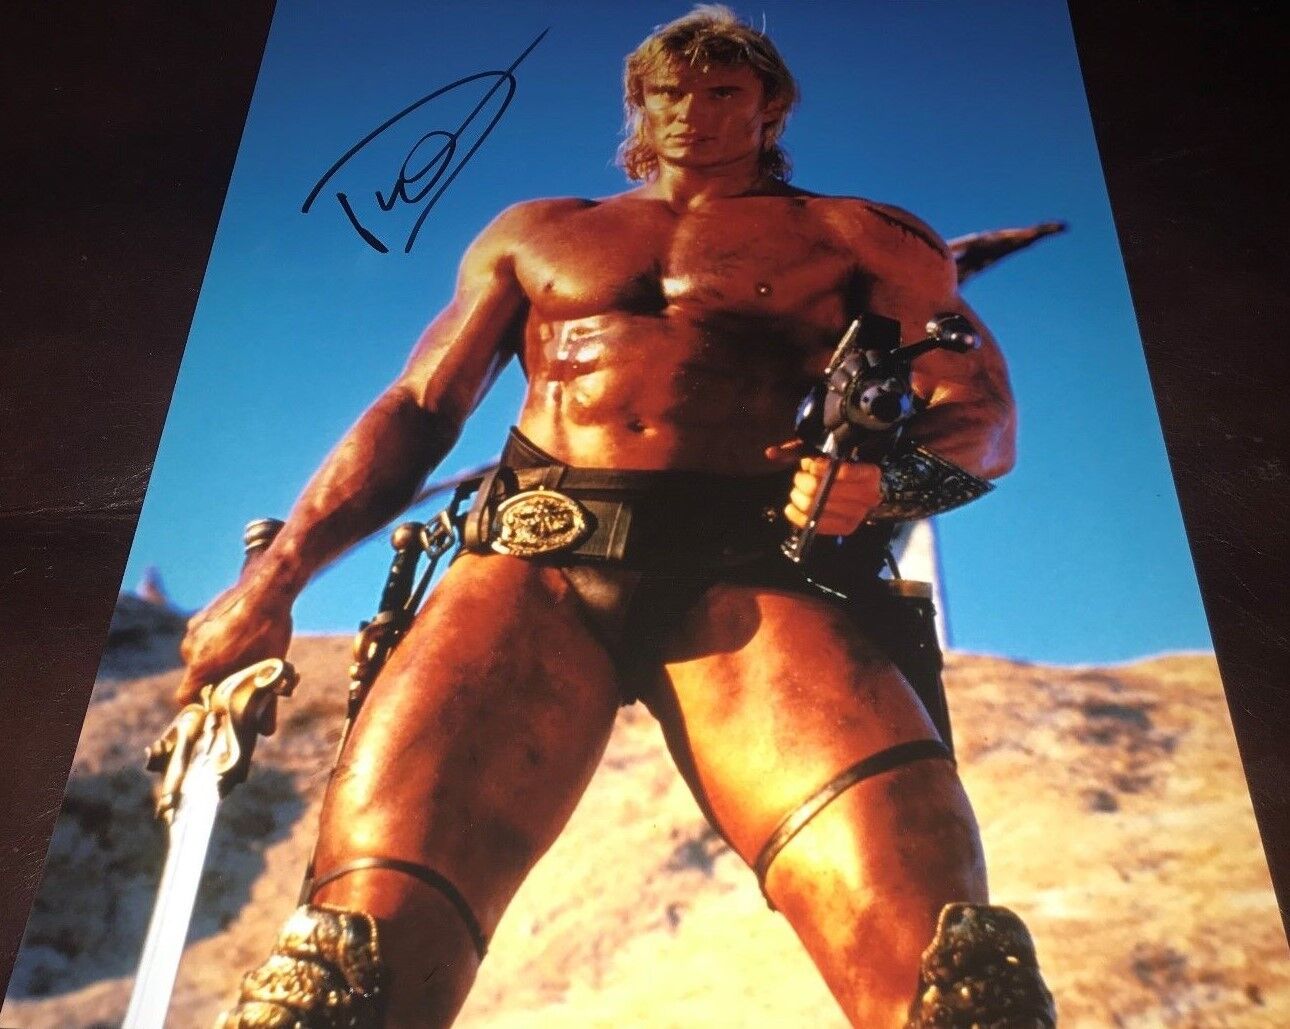 Dolph Lundgren In Masters Of The Universe Signed 11x14 Autographed Photo Poster painting COA 2